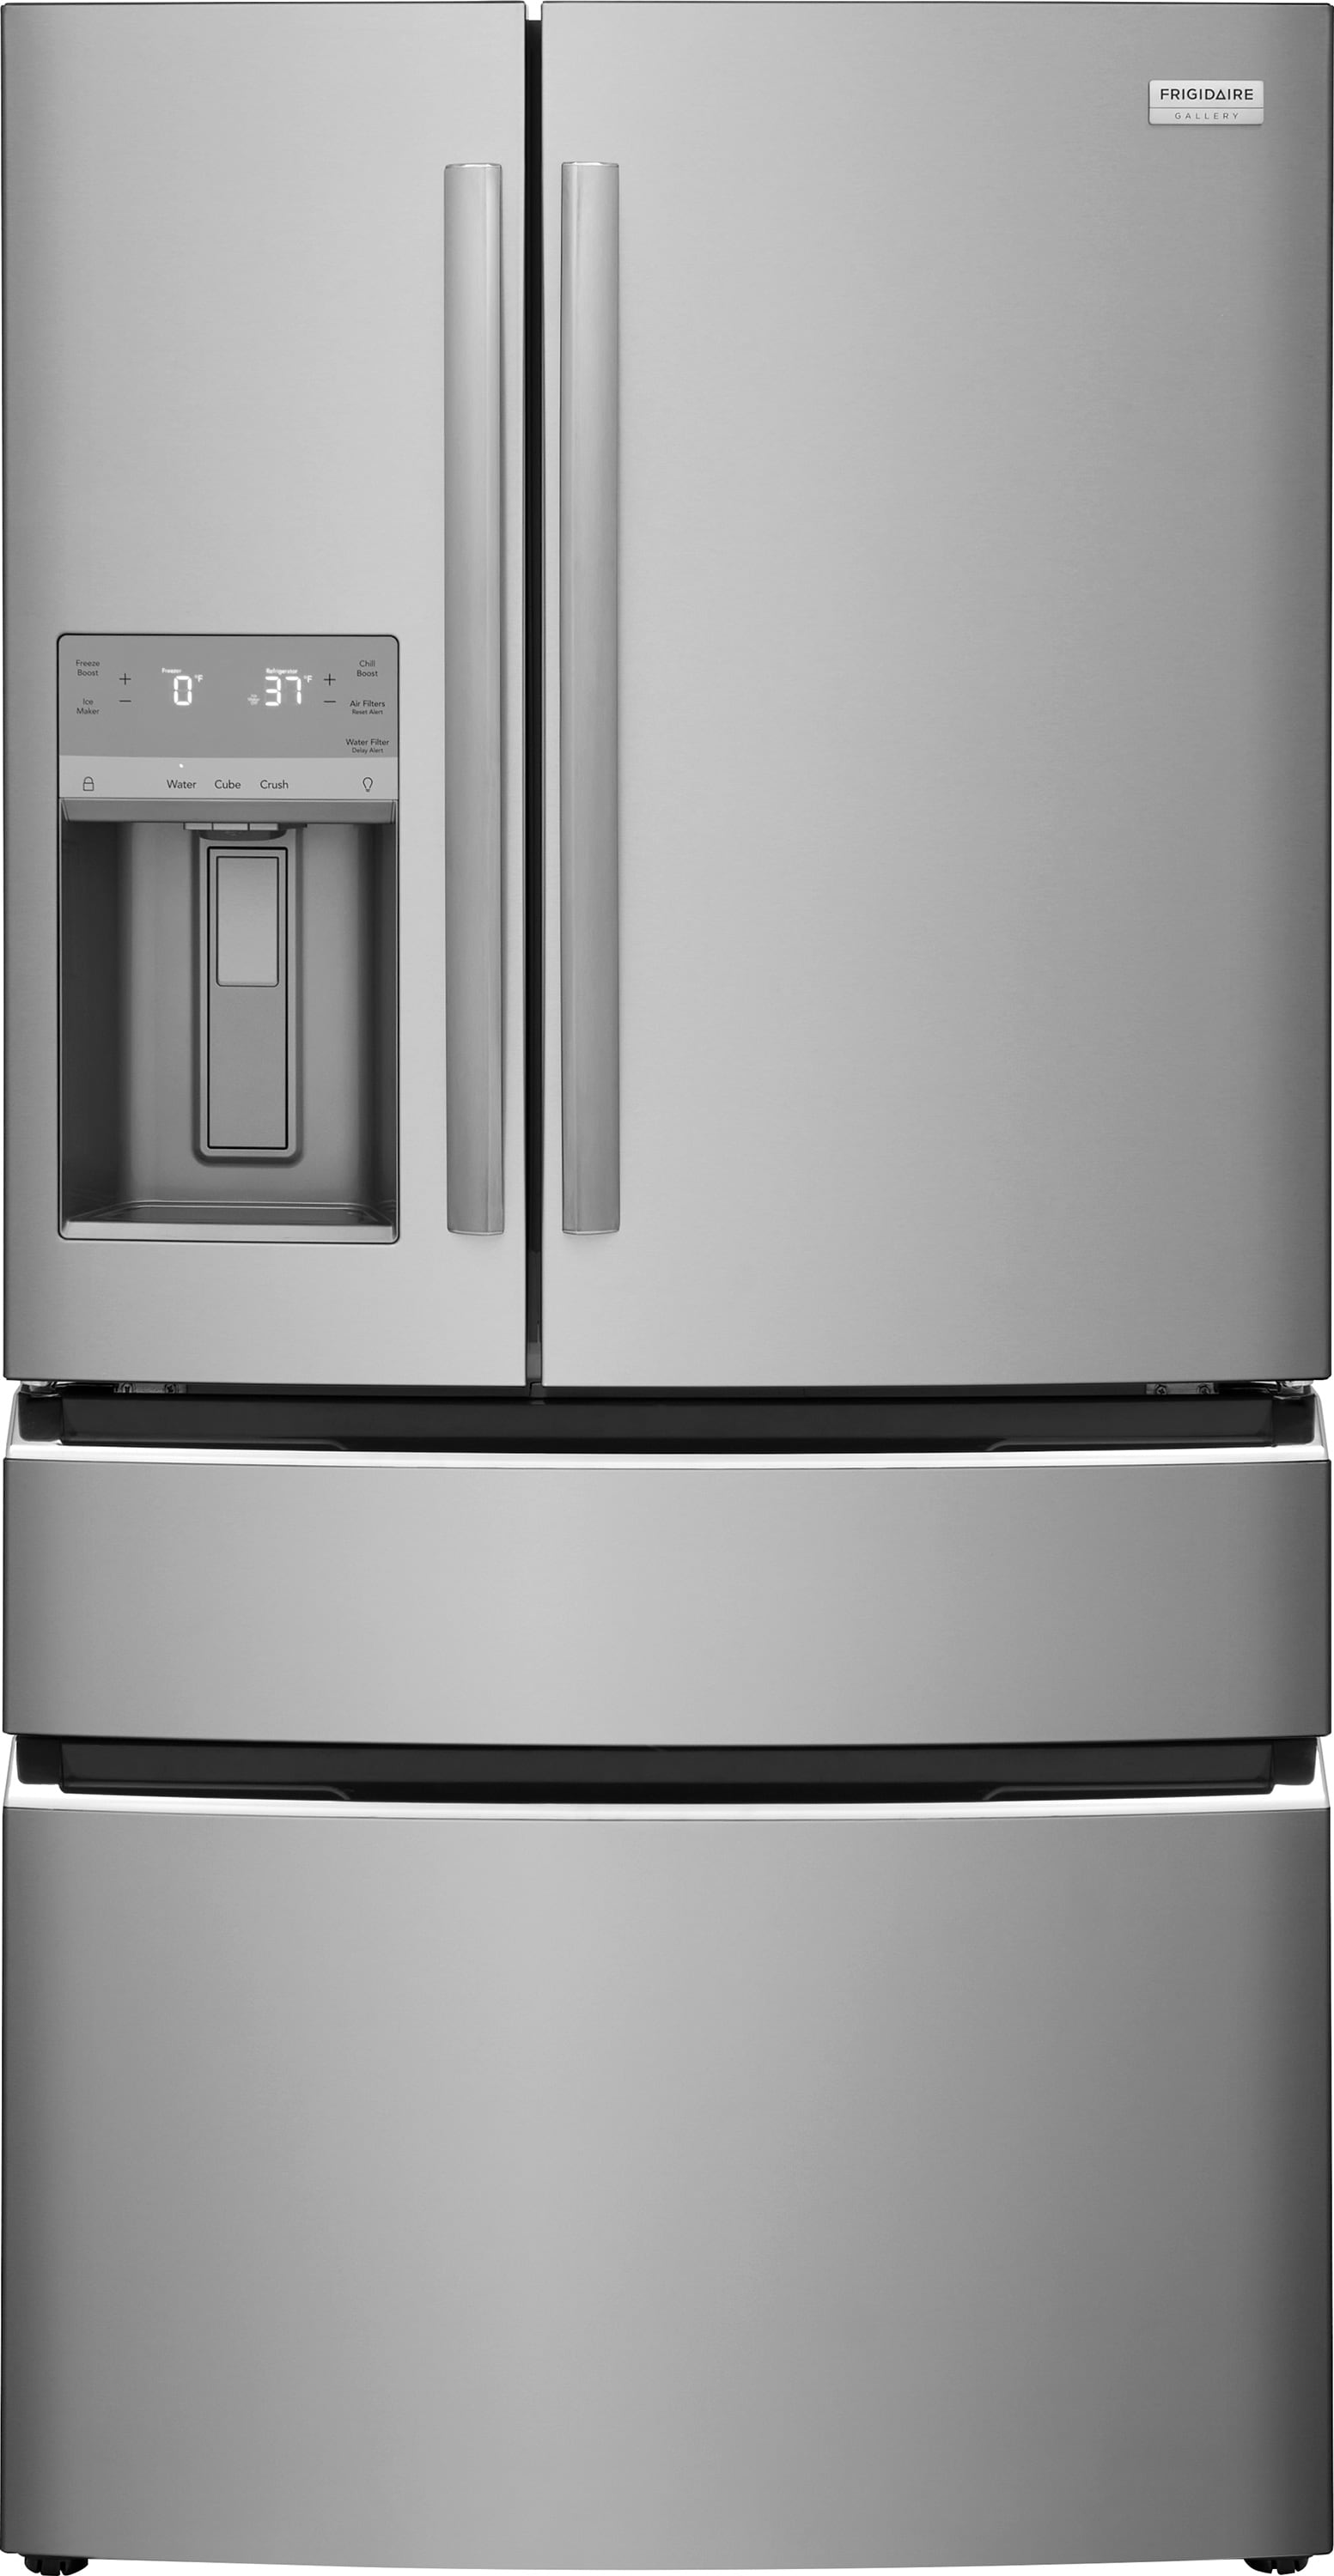 Choosing the Best Refrigerator For Your Kitchen